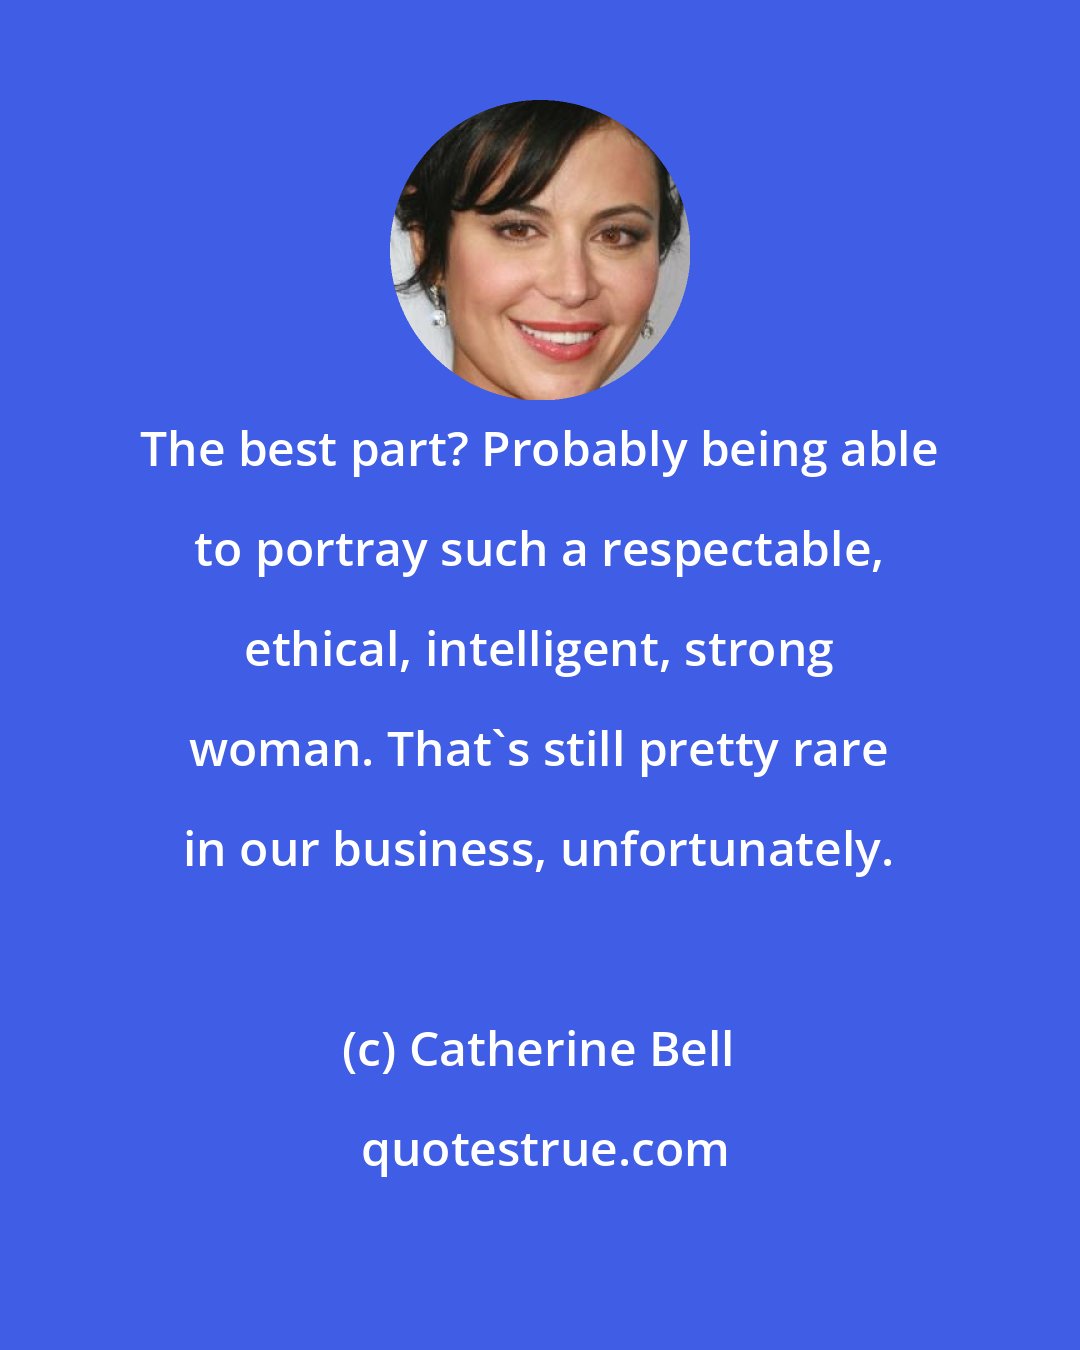 Catherine Bell: The best part? Probably being able to portray such a respectable, ethical, intelligent, strong woman. That's still pretty rare in our business, unfortunately.